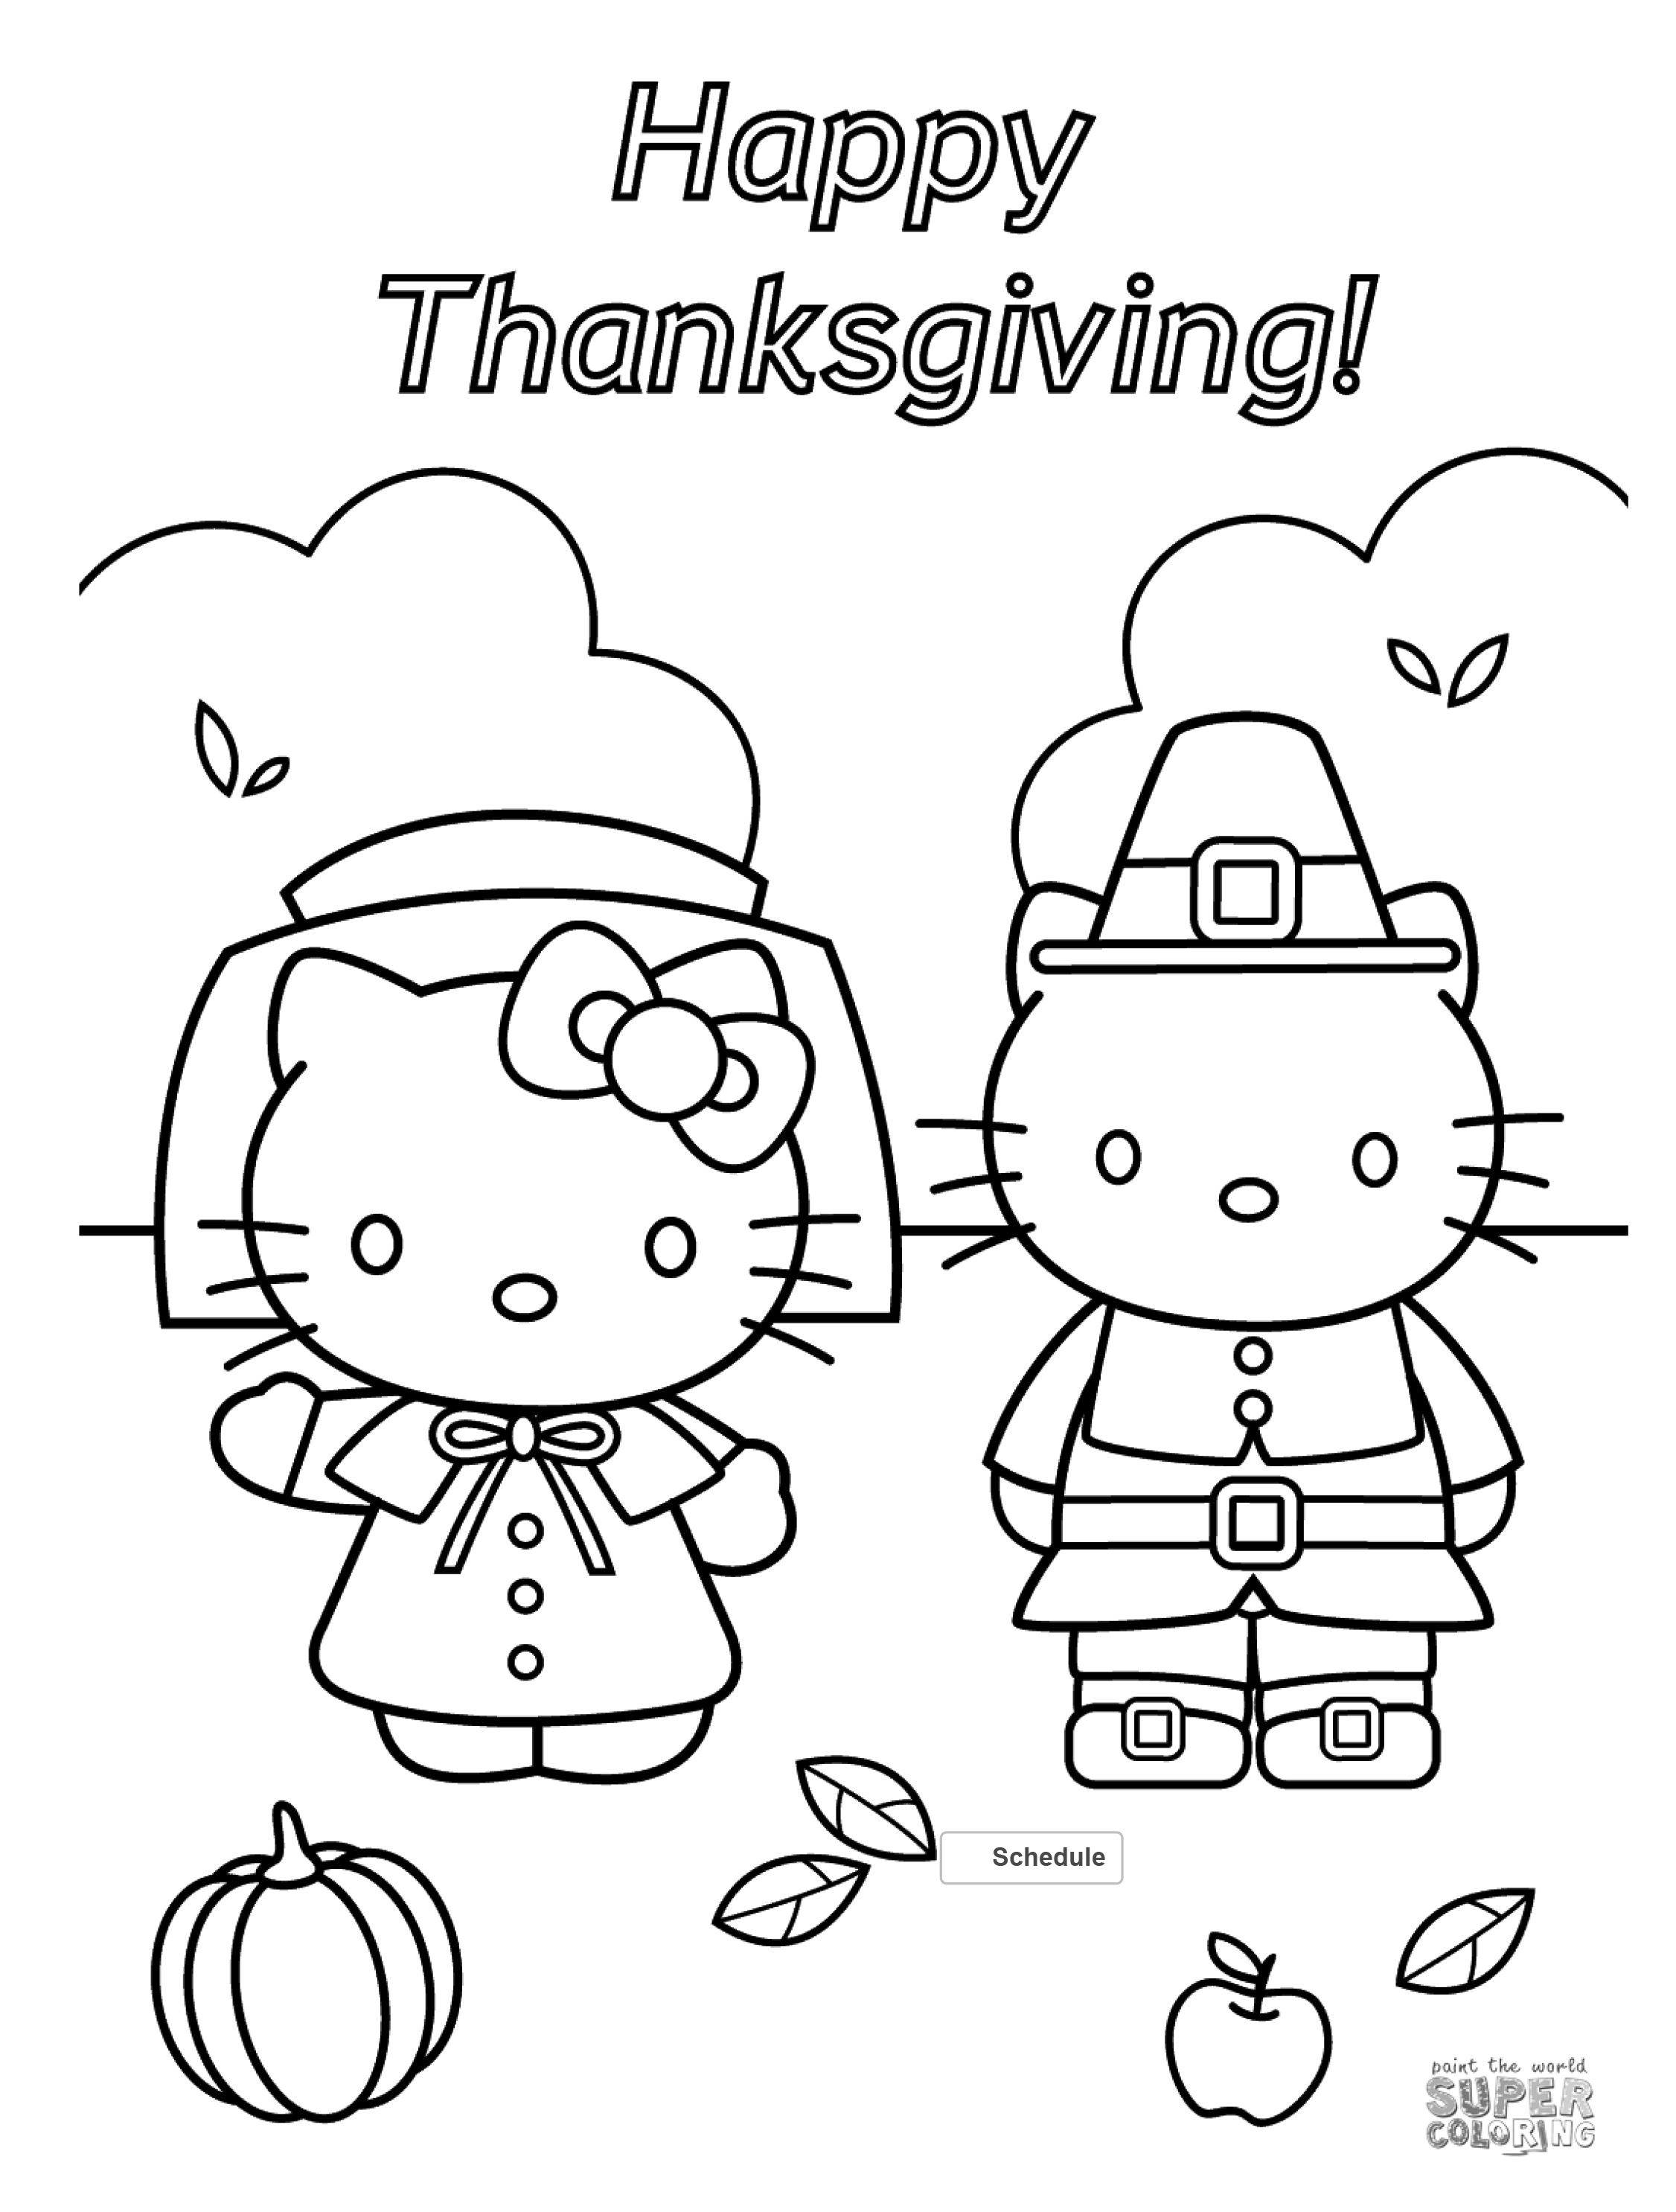 Dinner Plate Coloring Page Free Thanksgiving Coloring Pages For Adults Kids Happiness Is